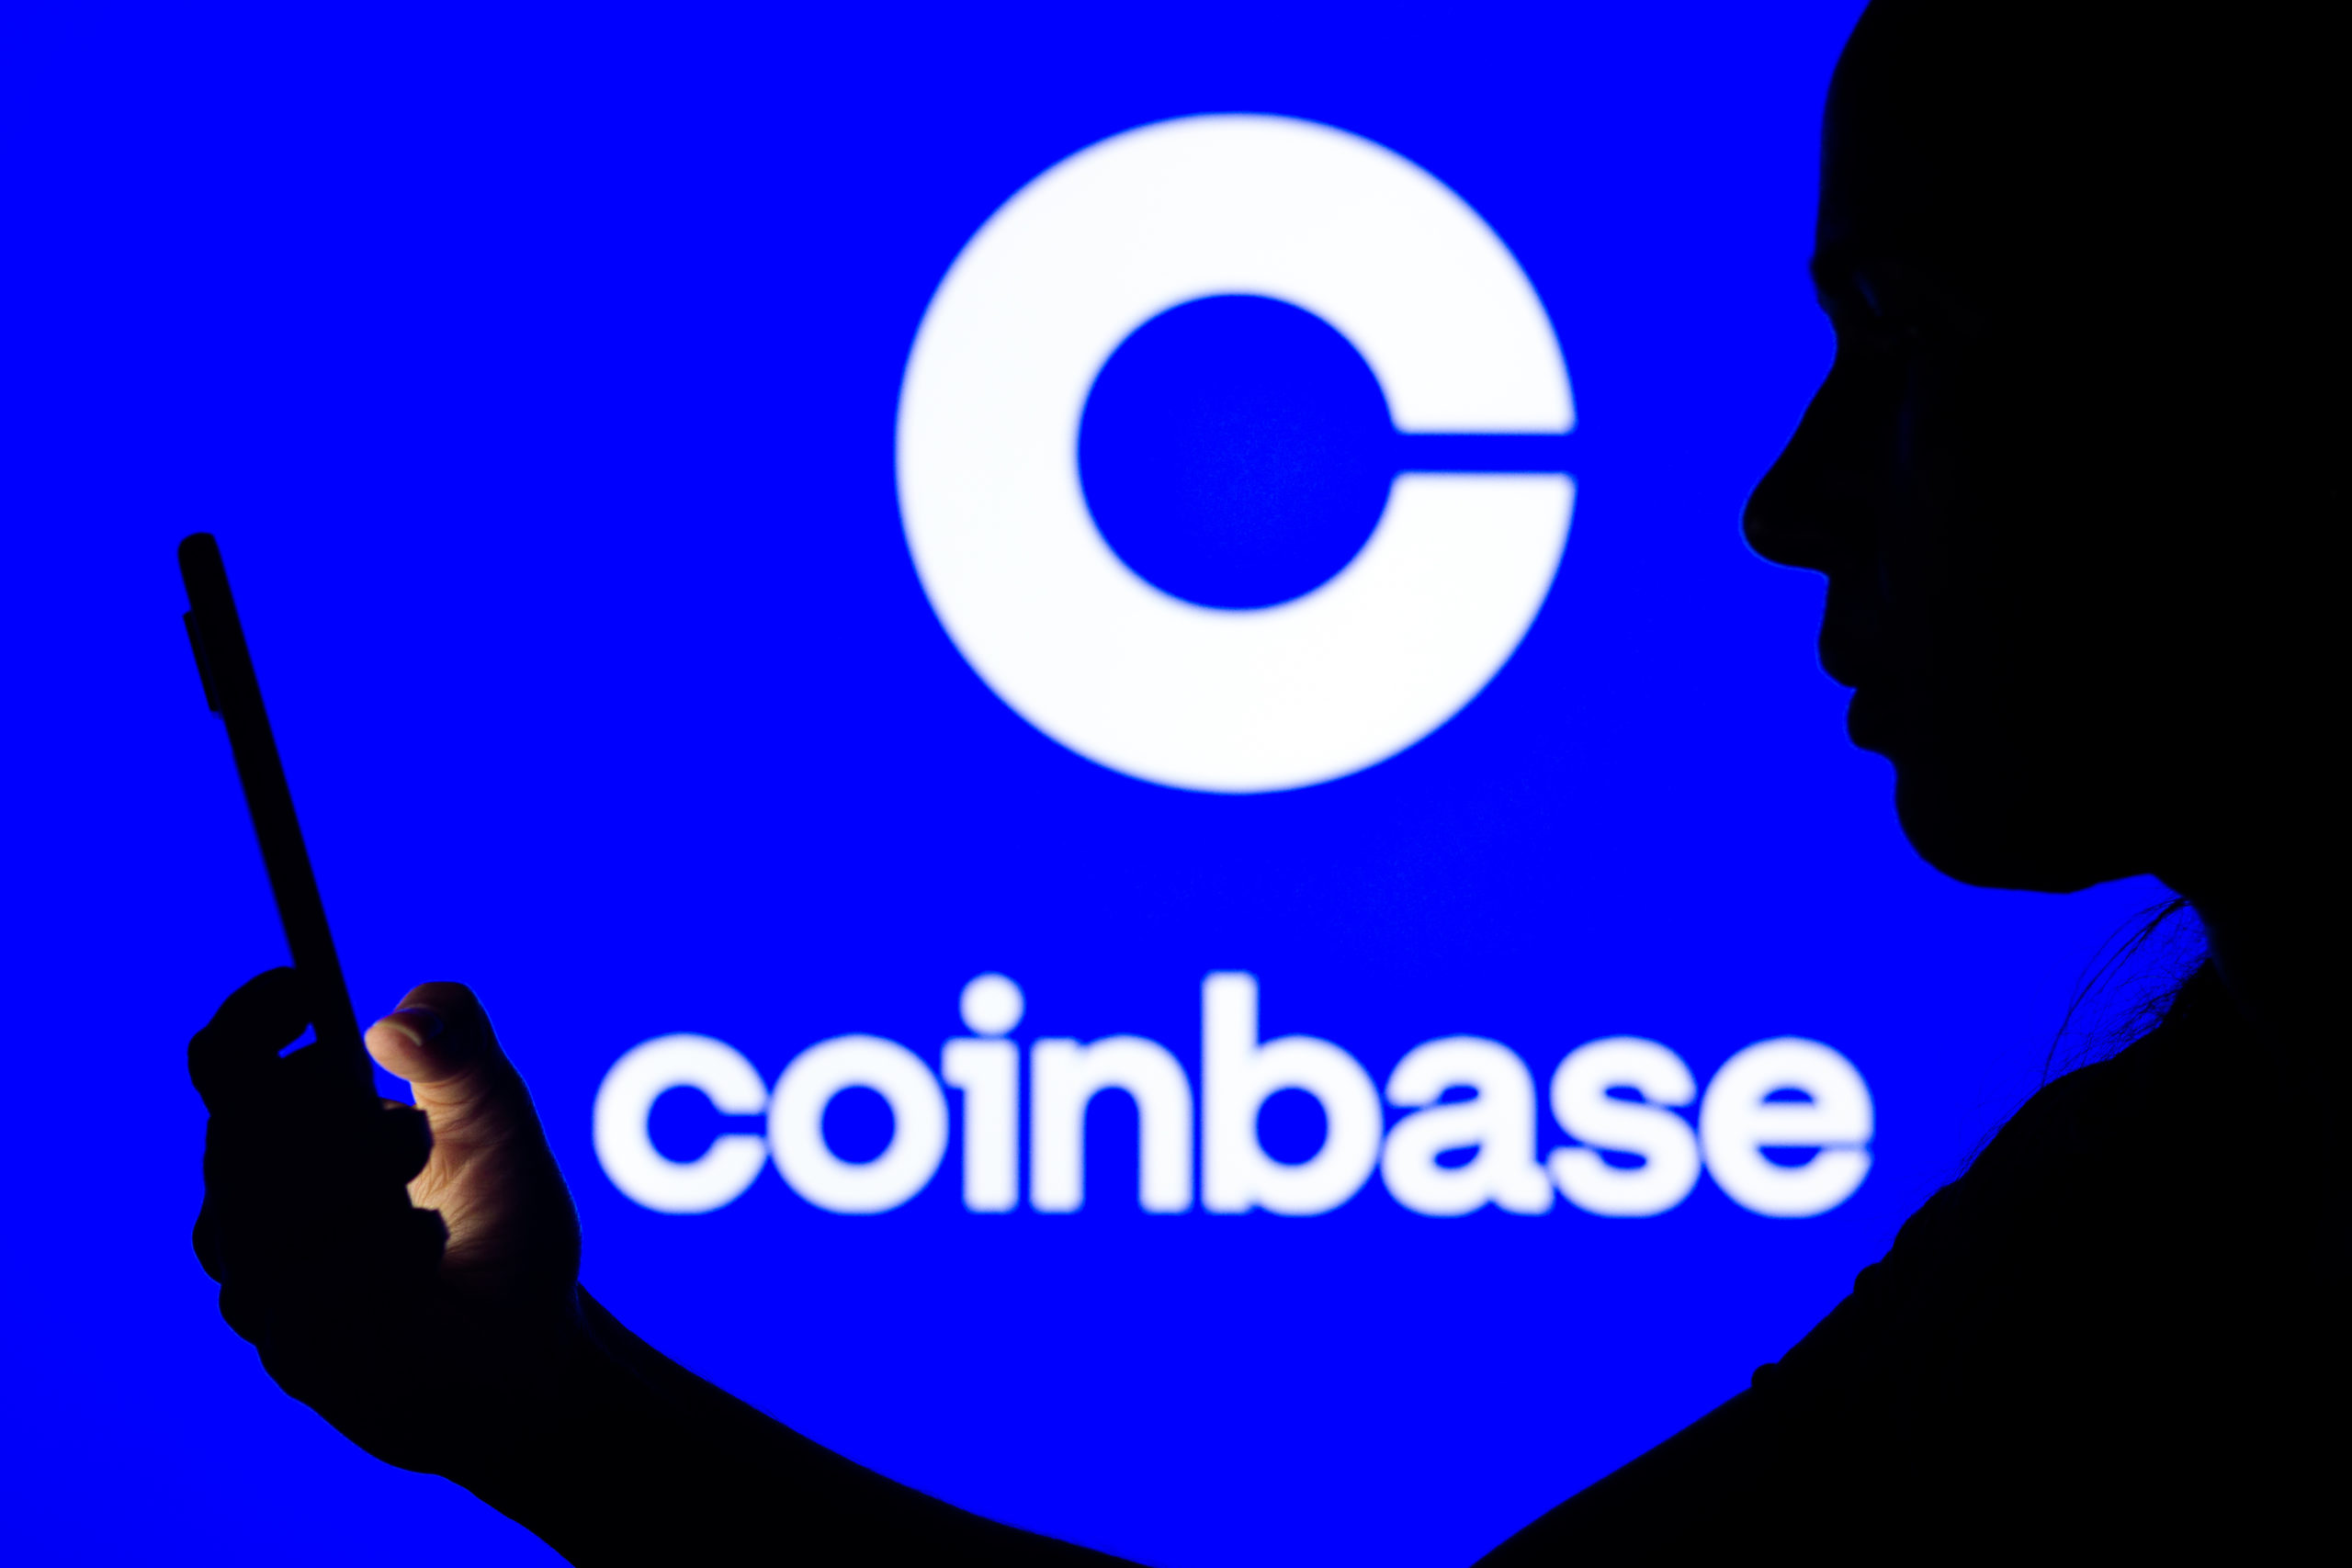 Coinbase’s abrupt hiring reversal blindsided would-be employees